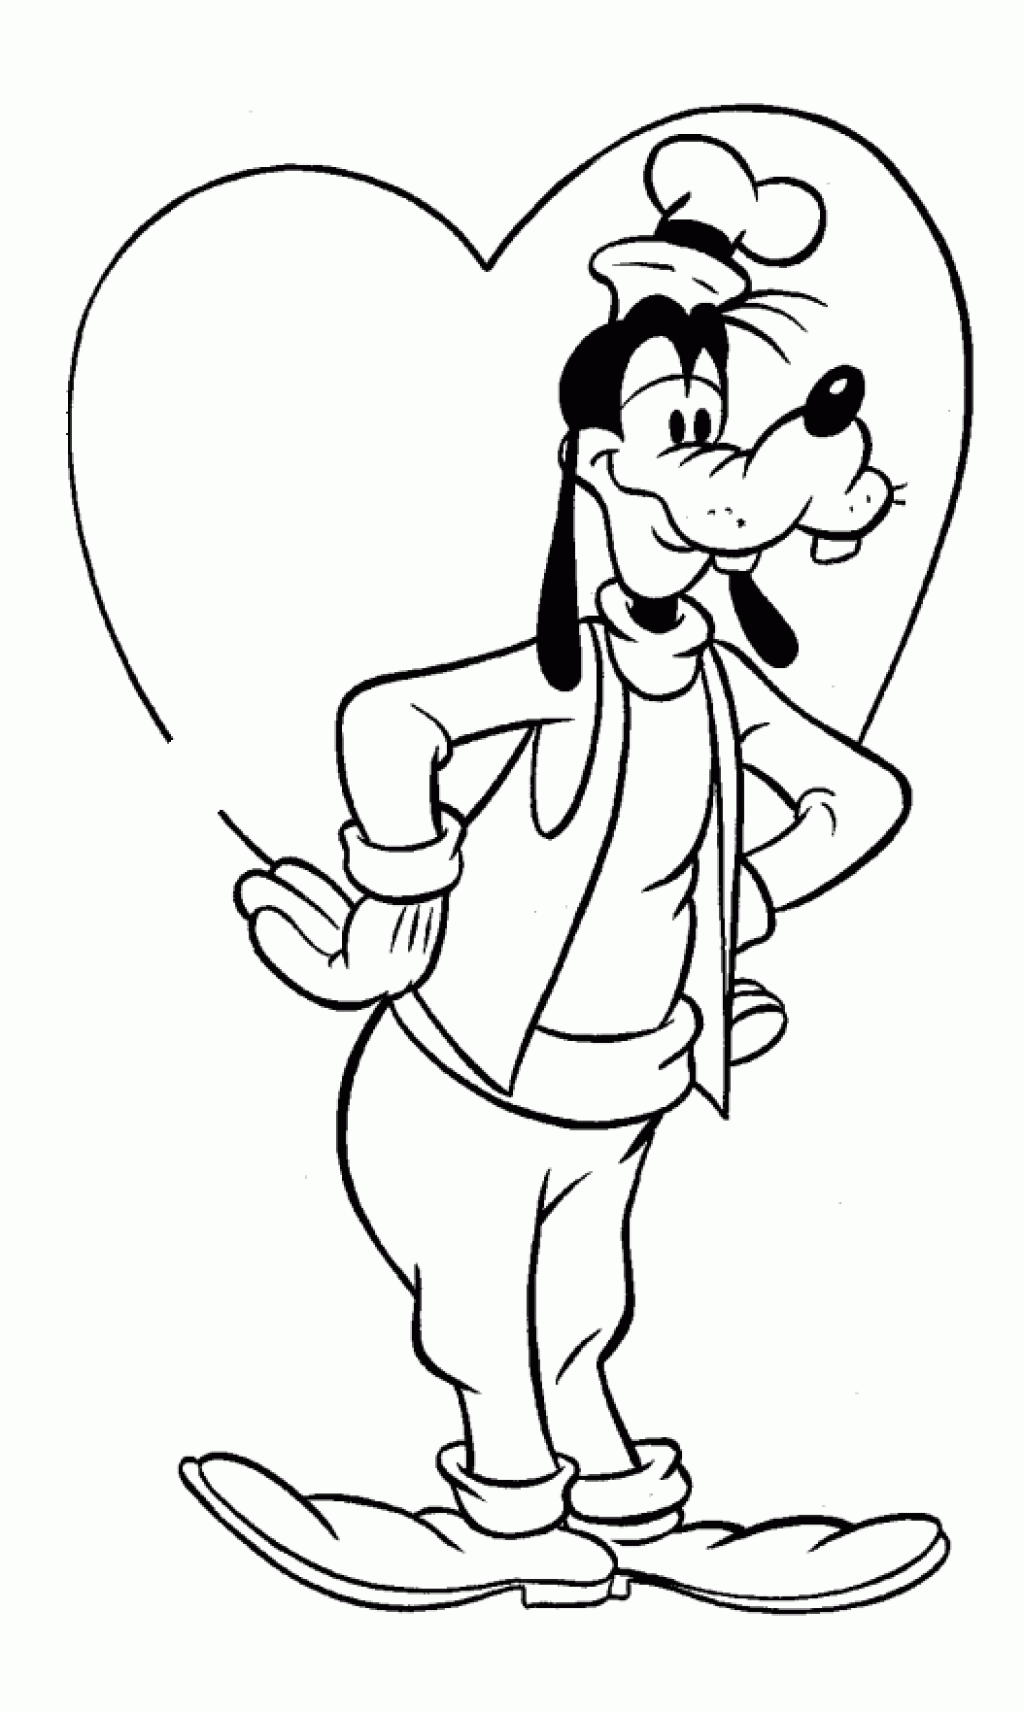 Amusing life of Goofy & his friends 17 Goofy coloring pages | Free